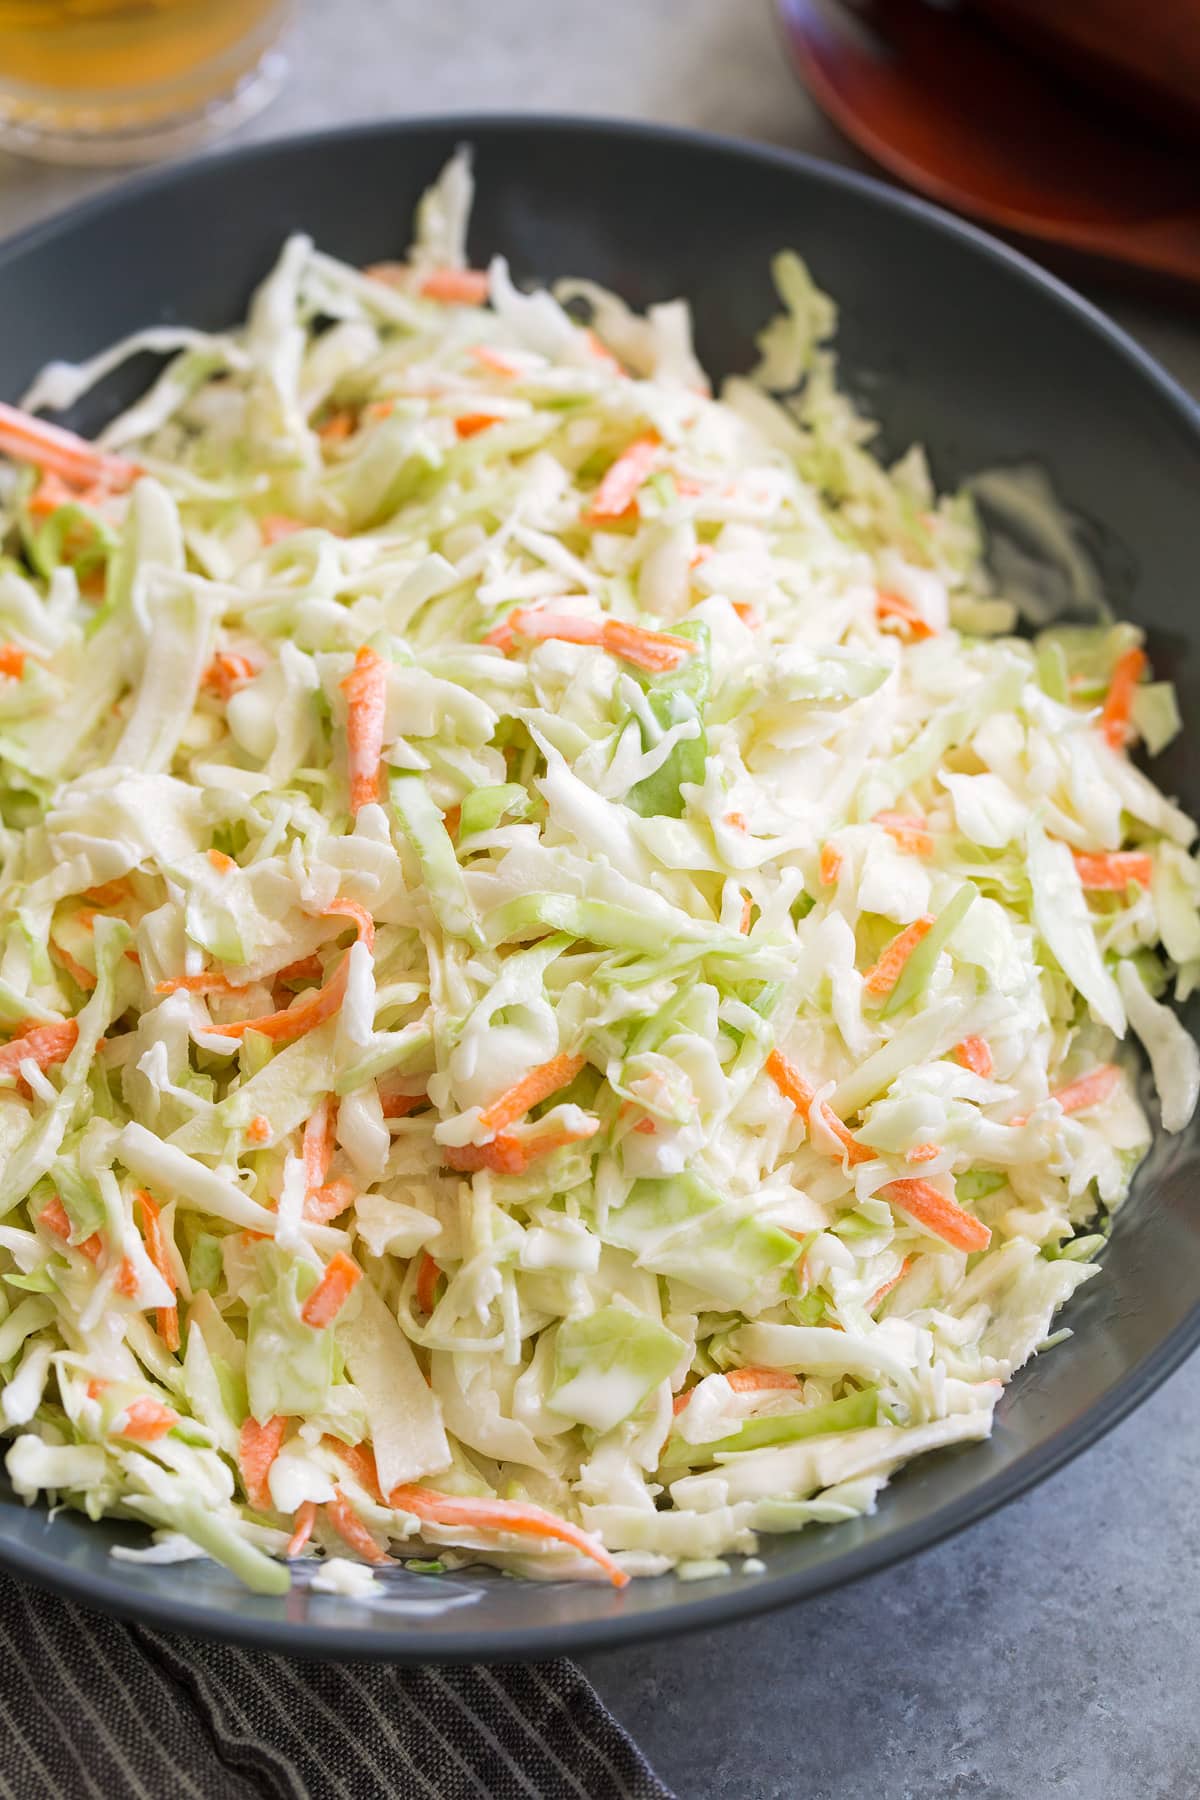 Coleslaw Recipe Only 4 Ingredients Cooking Classy,Banana Flower Food